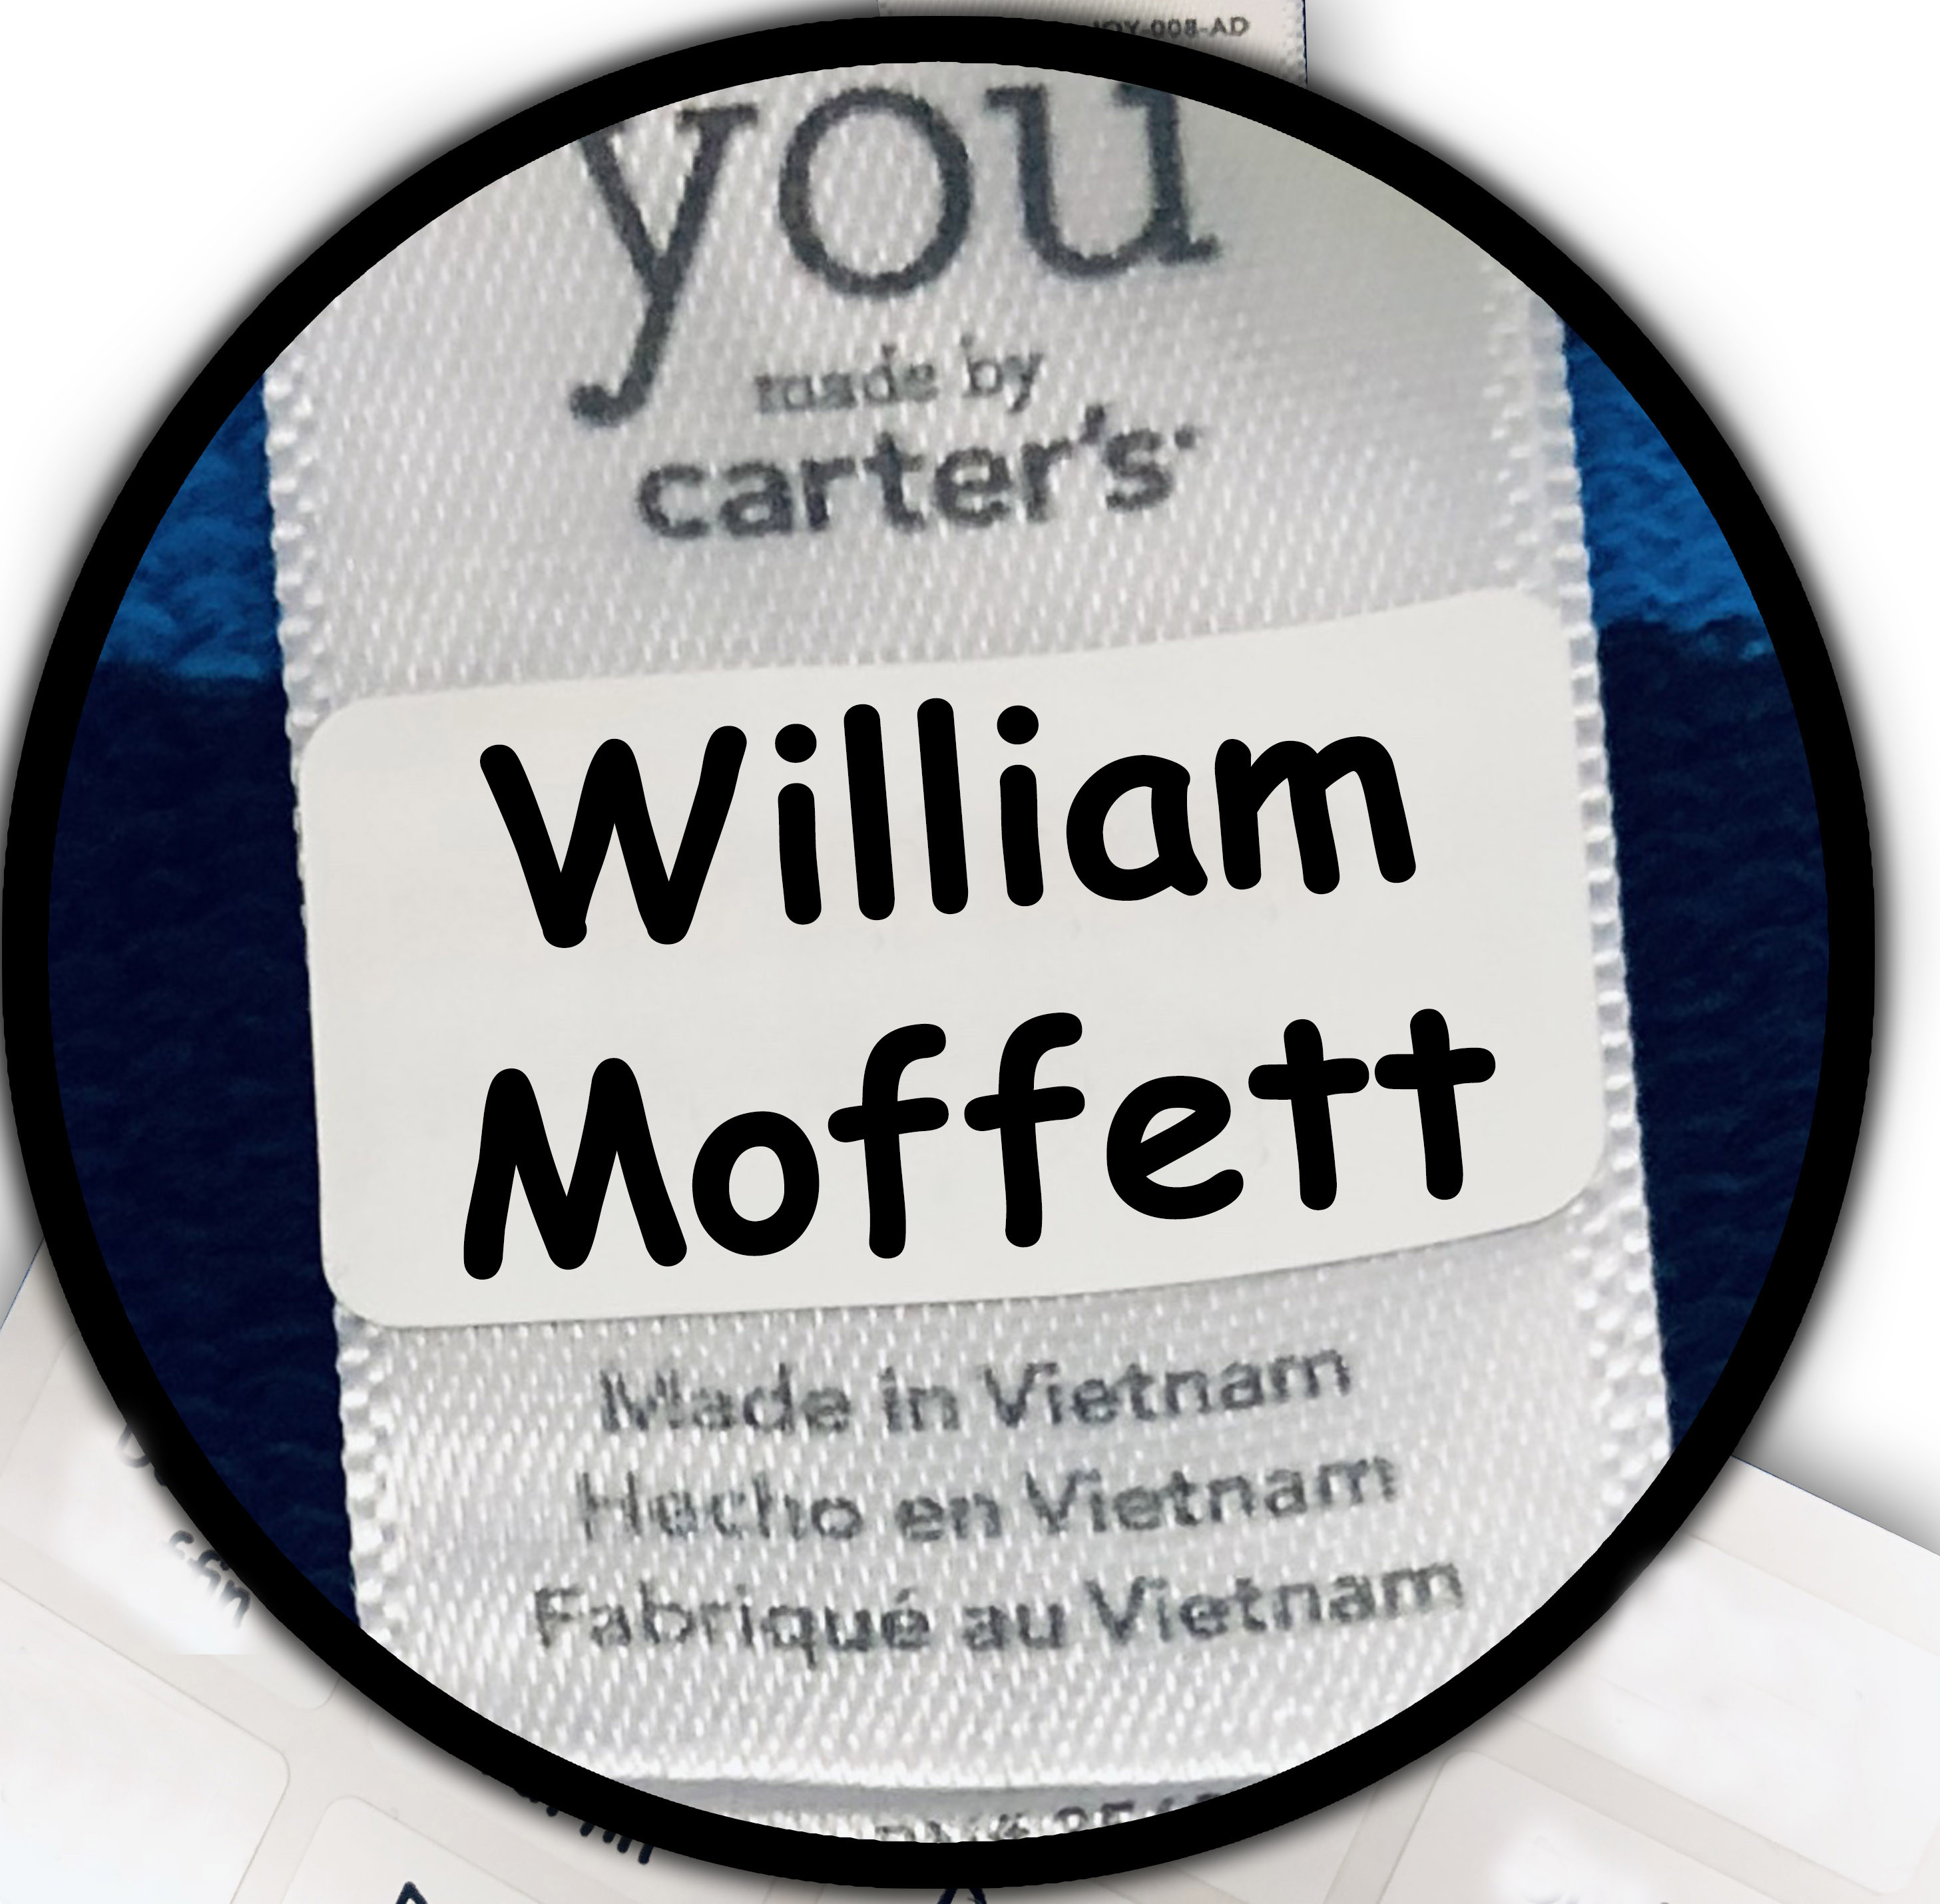 Custom Iron On Labels | Iron On Name Tags For Clothes | IdentaMe Labels -  price per 36 labels